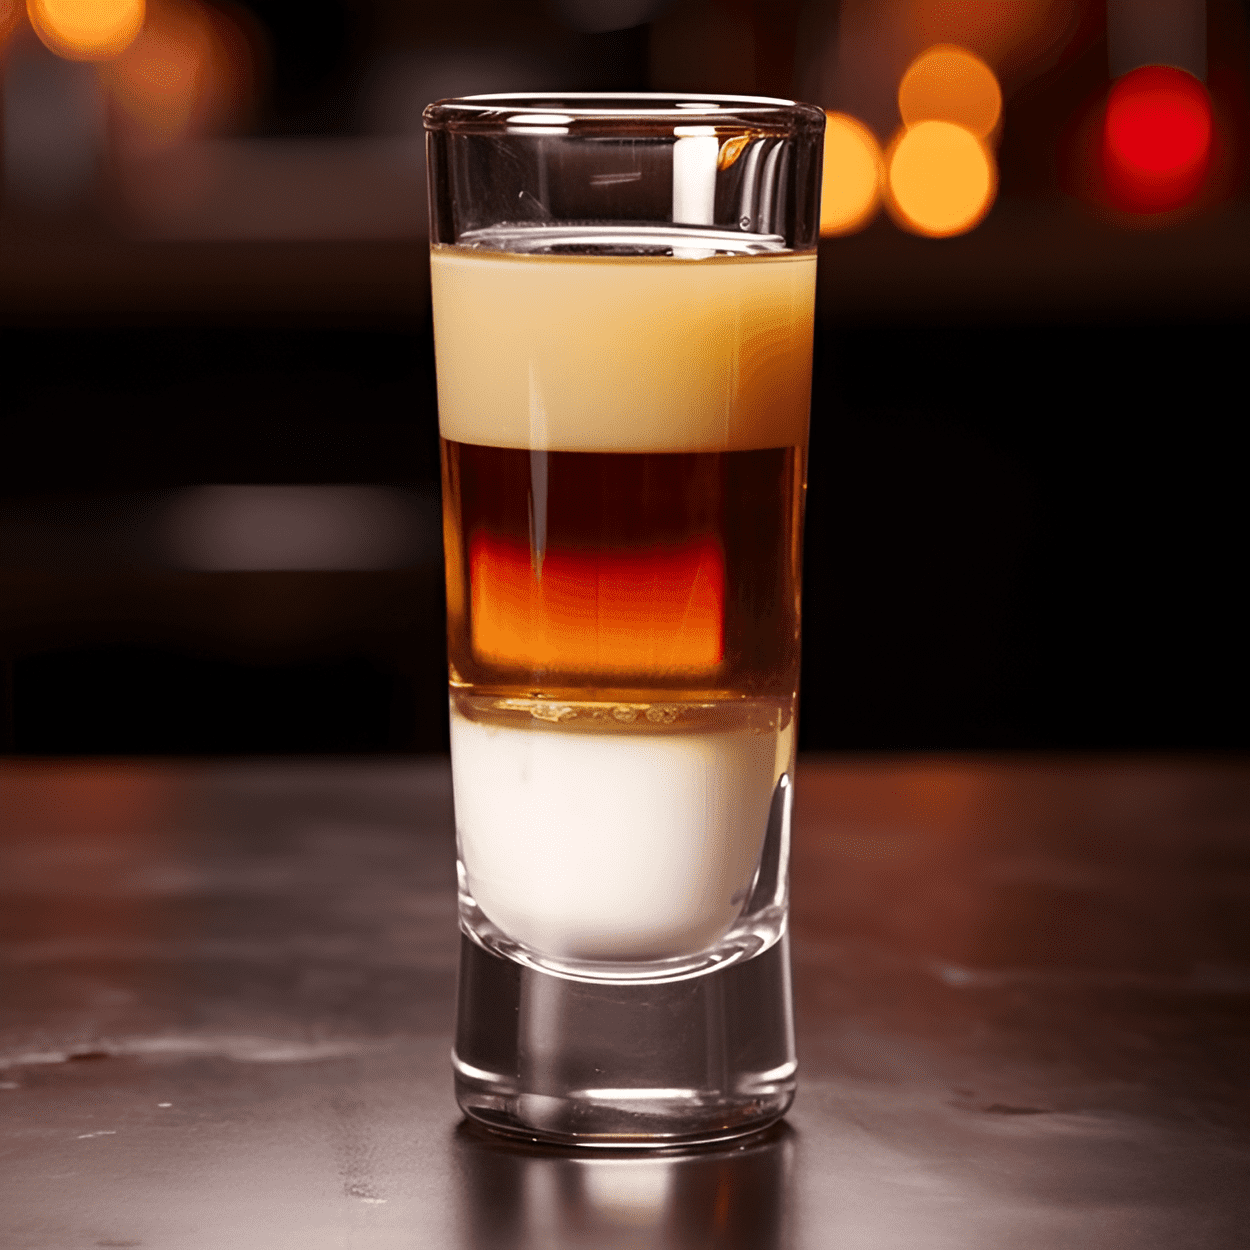 BMW Cocktail Recipe - The BMW cocktail is a harmonious blend of sweet, creamy, and strong flavors. The sweetness of the Malibu rum, the creaminess of the Baileys, and the robustness of the whiskey create a well-rounded and satisfying taste.